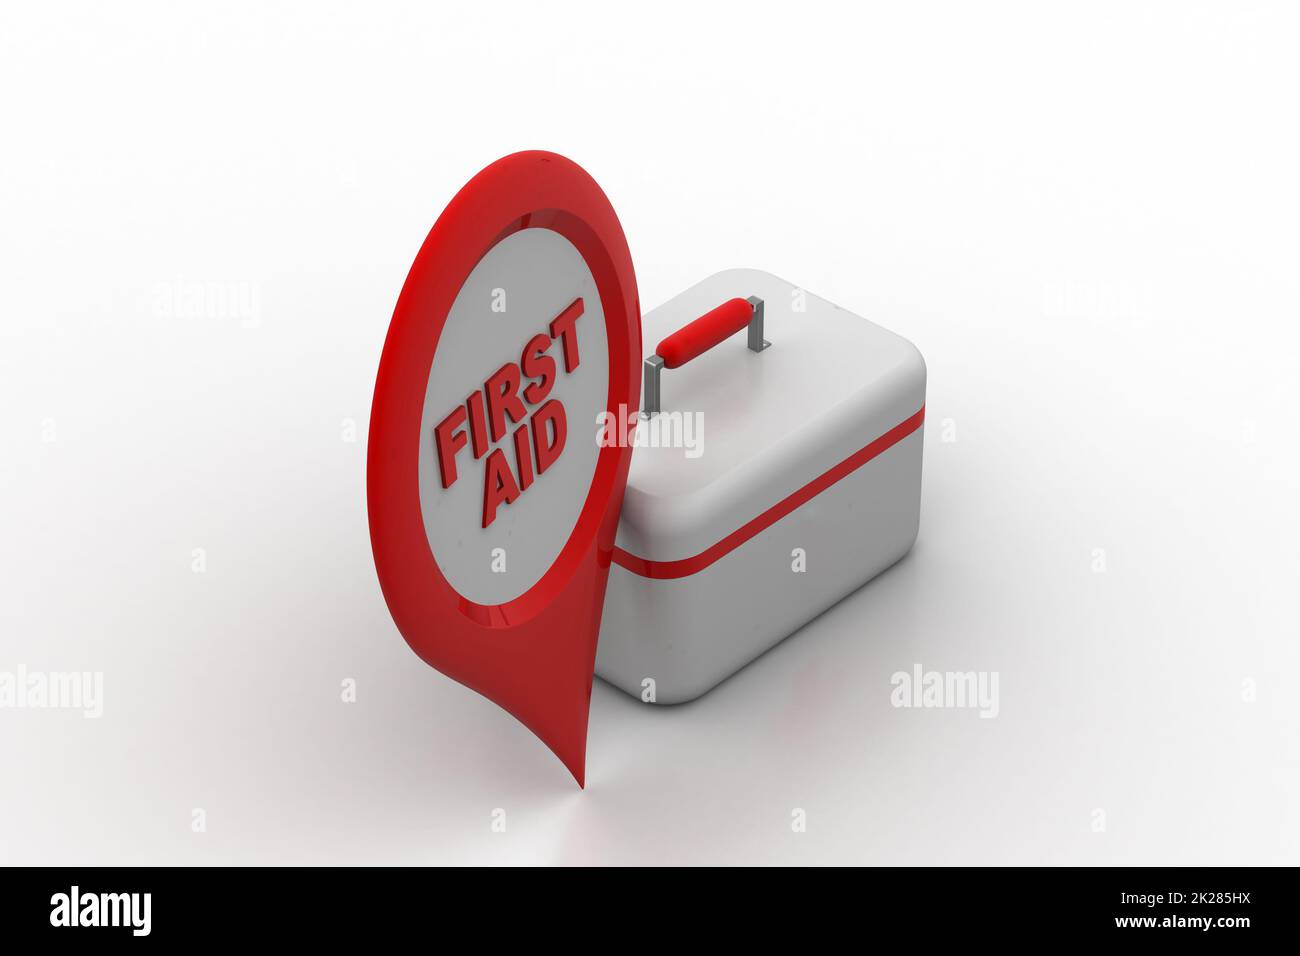 First aid kit with map locator Stock Photo